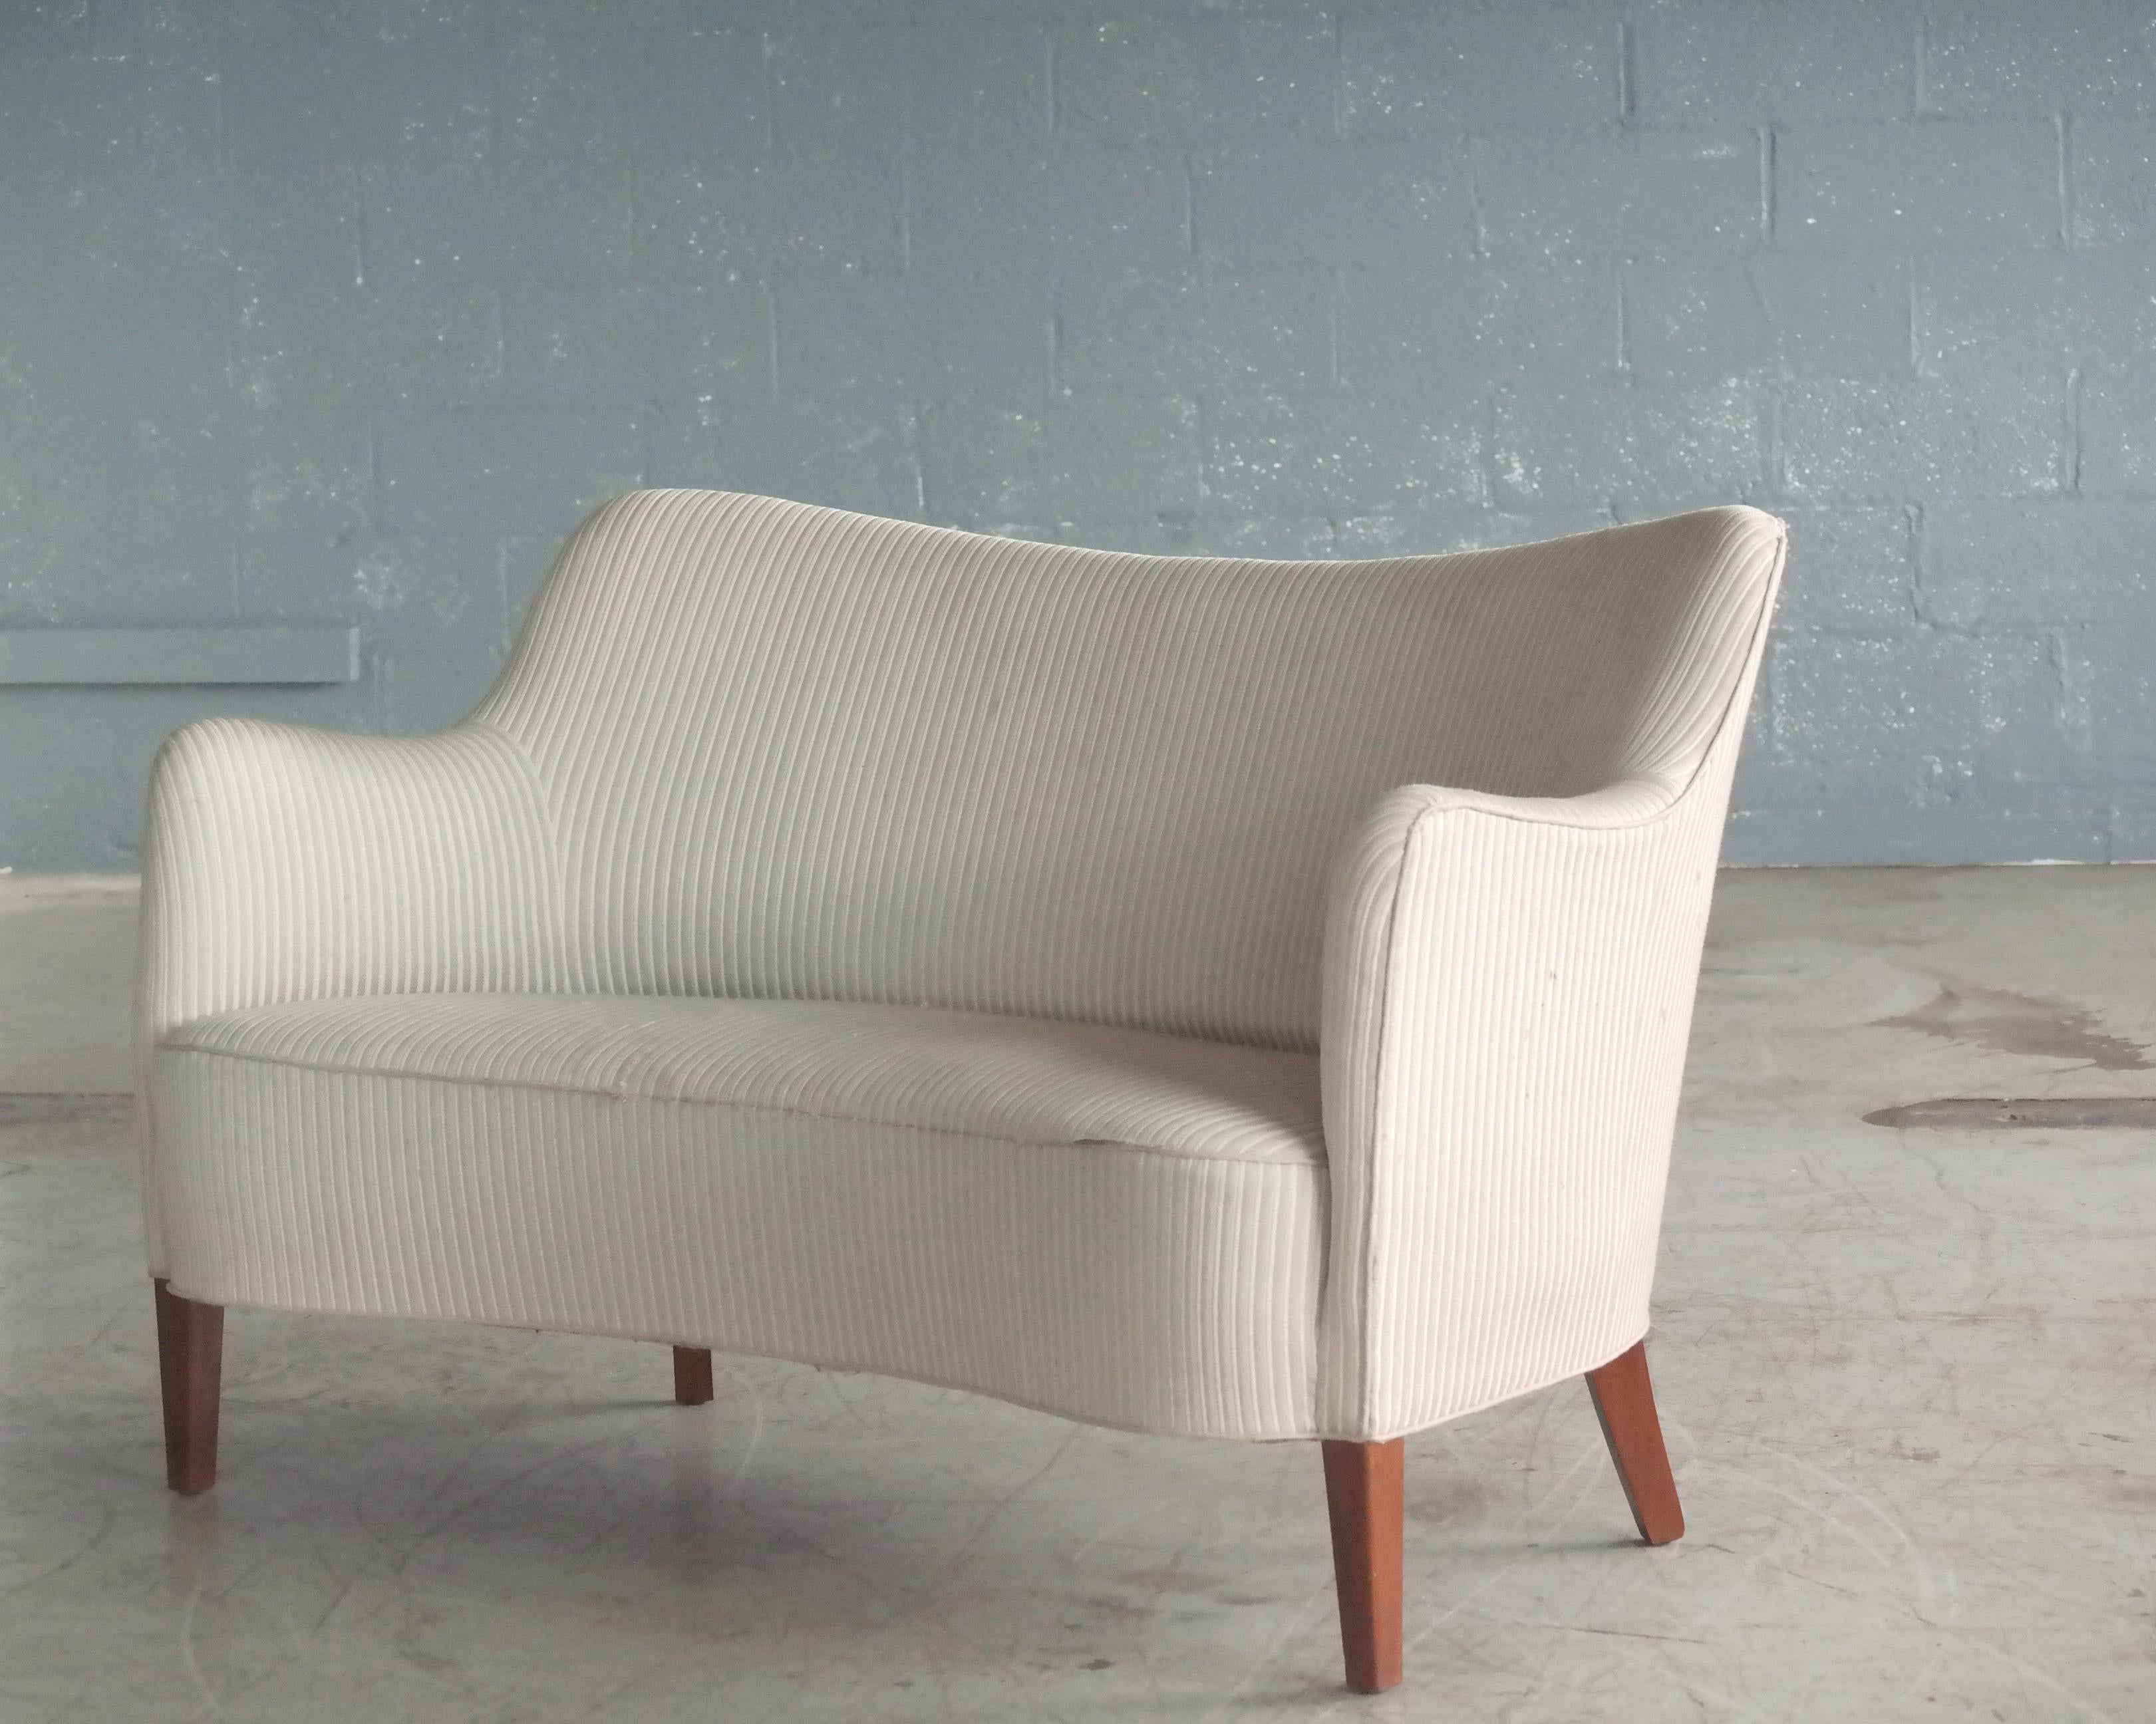 Beautiful and rare Danish settee or loveseat known as the 